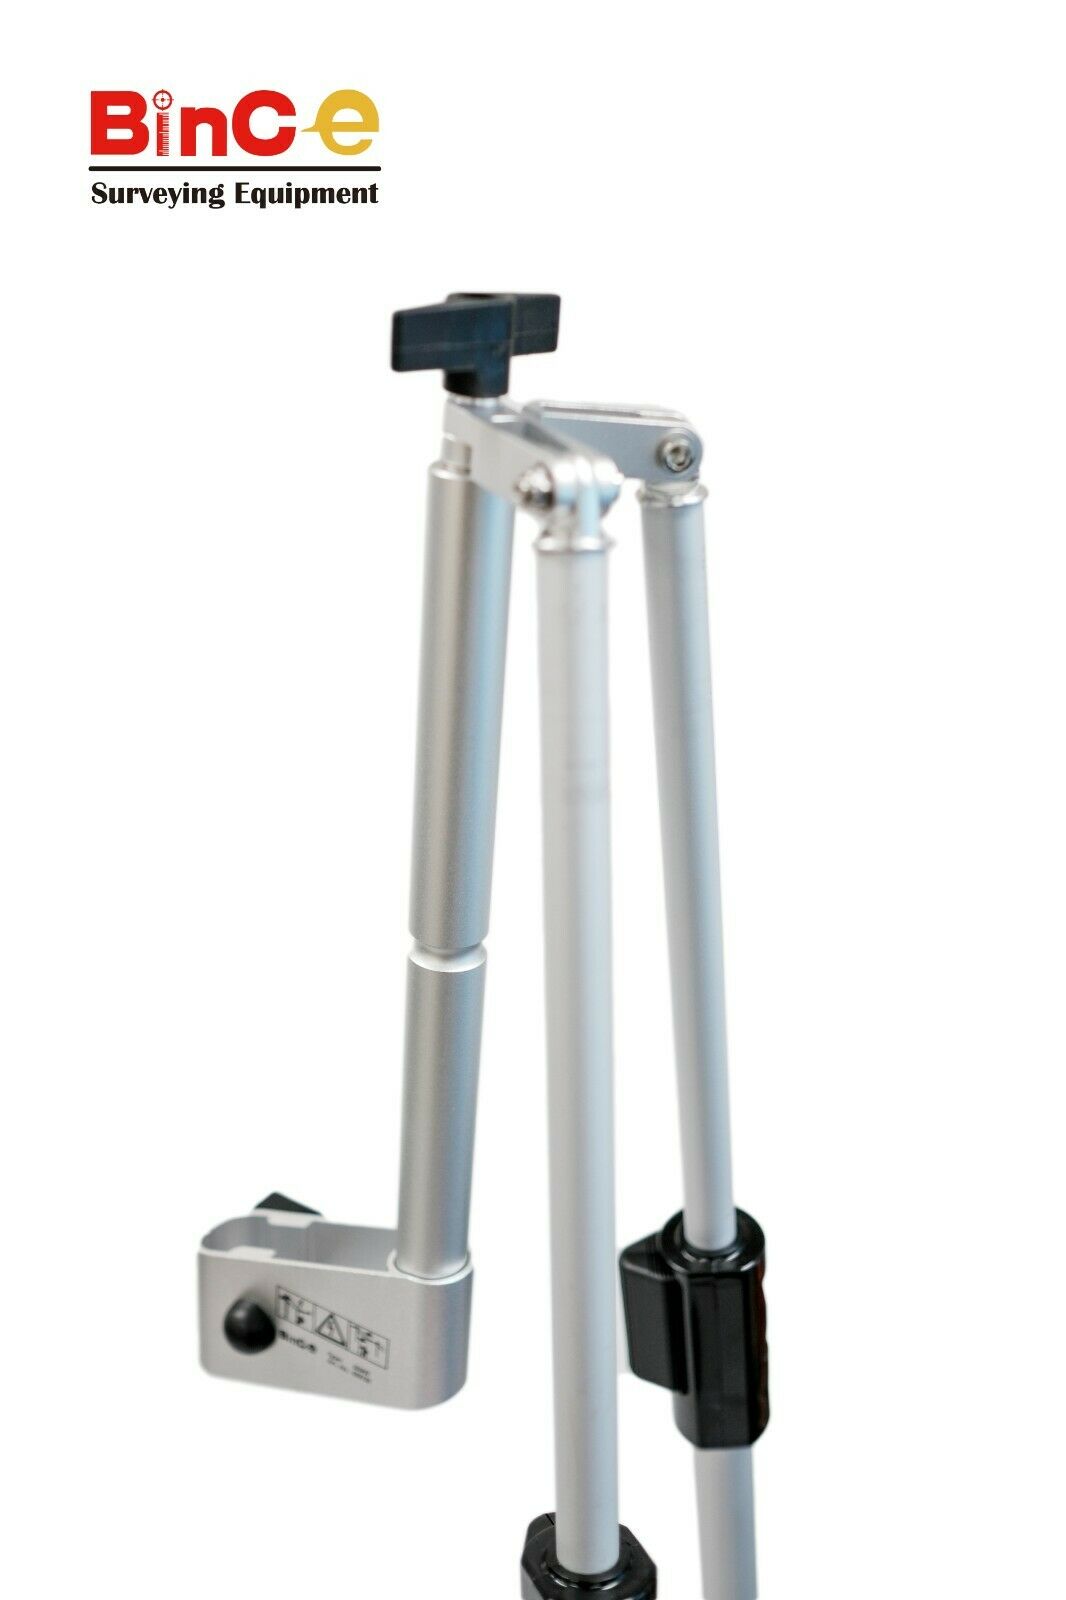 Leica Type Dual Strut Support Bipod for Survey Telescopic Prism Poles Surveying